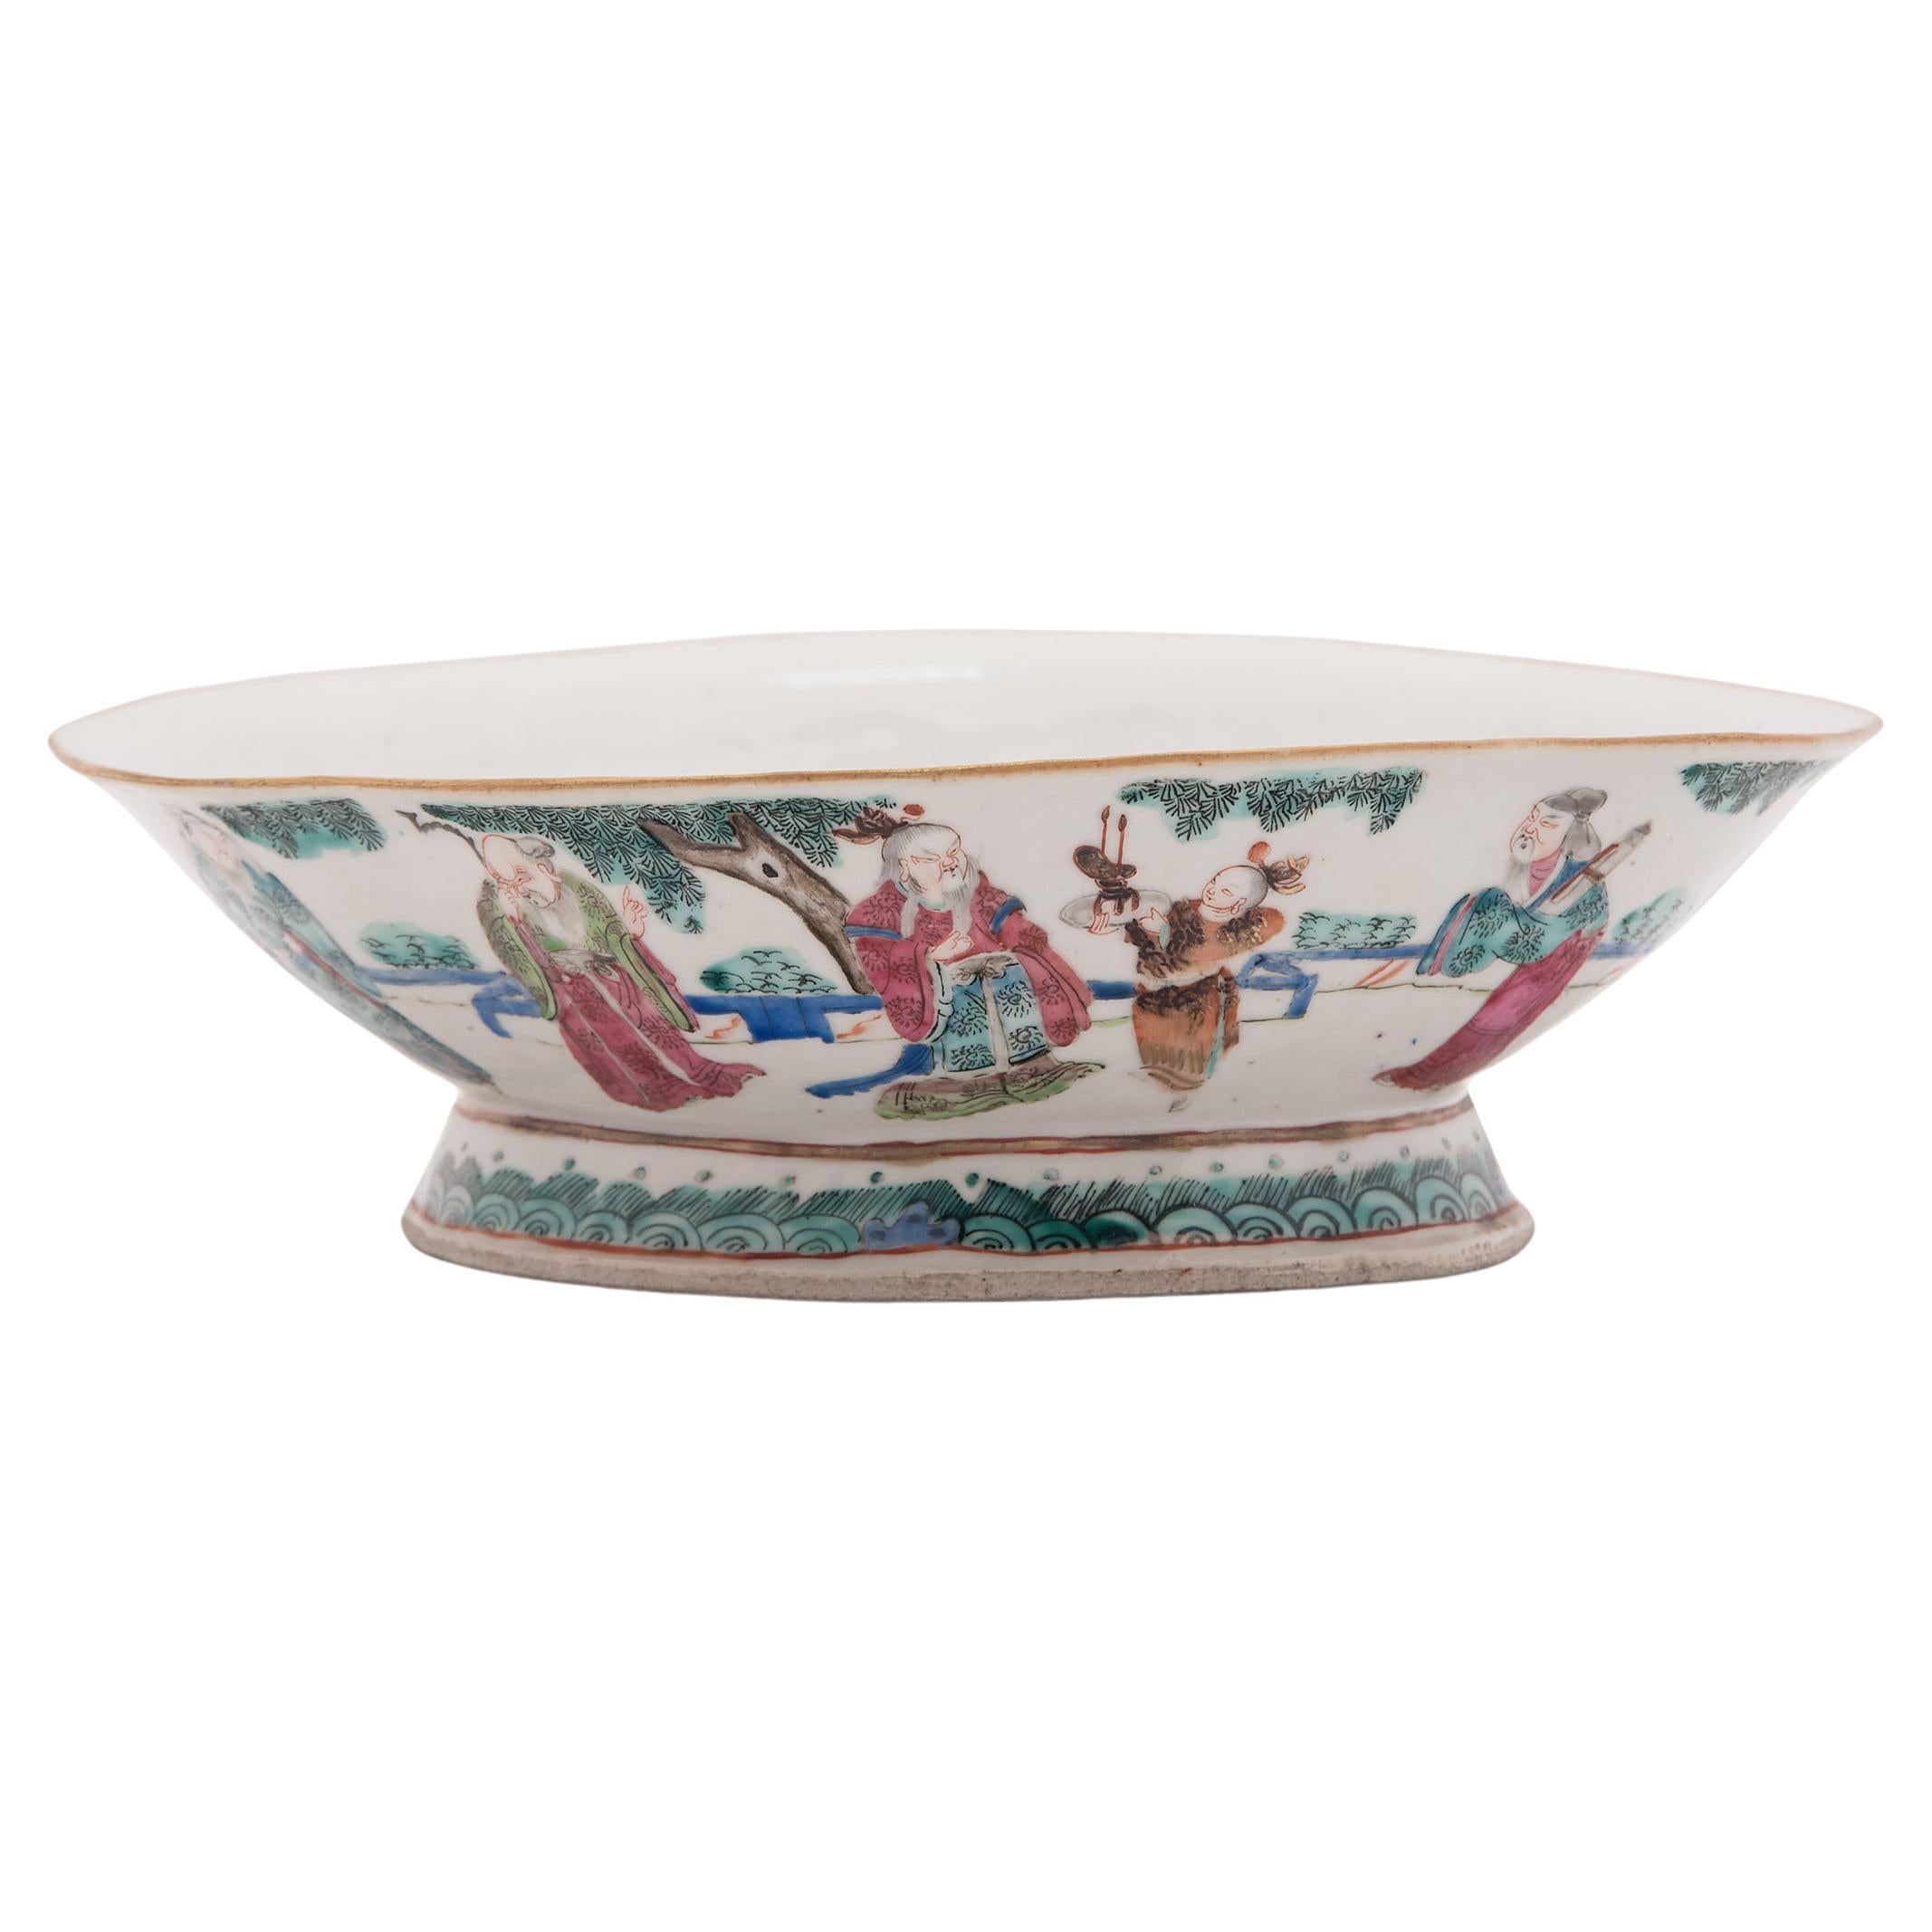 Chinese Footed Offering Bowl with Gathering of Immortals, c. 1850